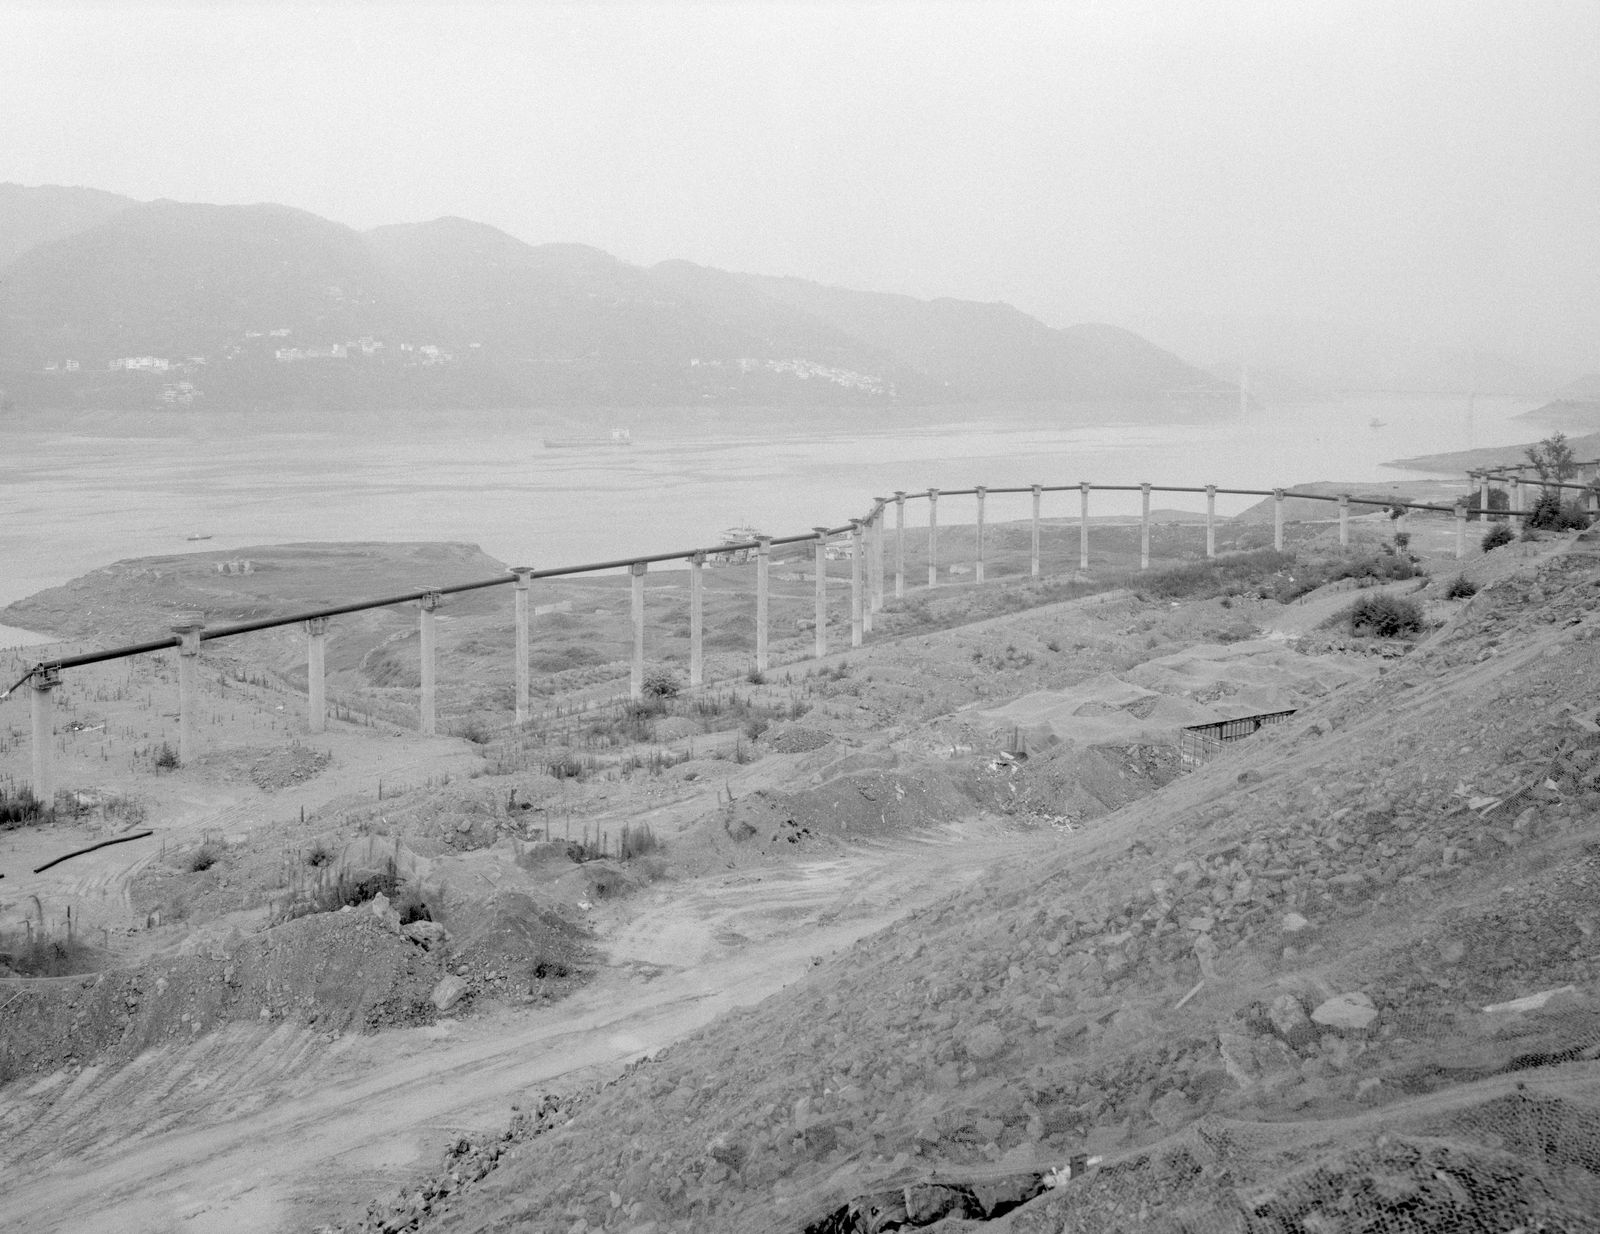 © Yexin Qiu & Moying Zhang - The energy pipeline under construction aside the river.